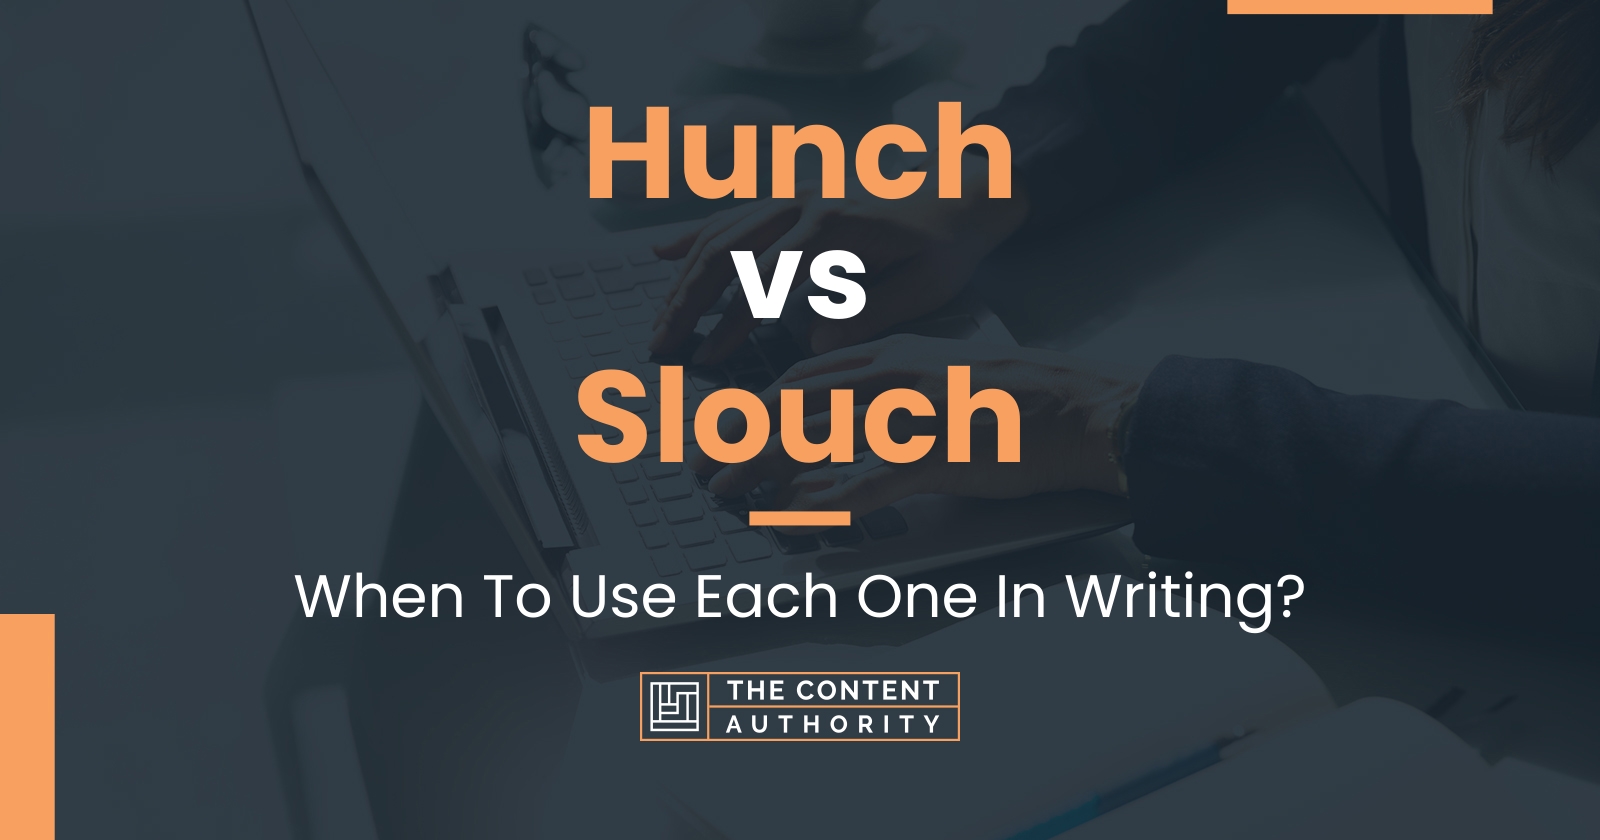 Hunch vs Slouch: When To Use Each One In Writing?